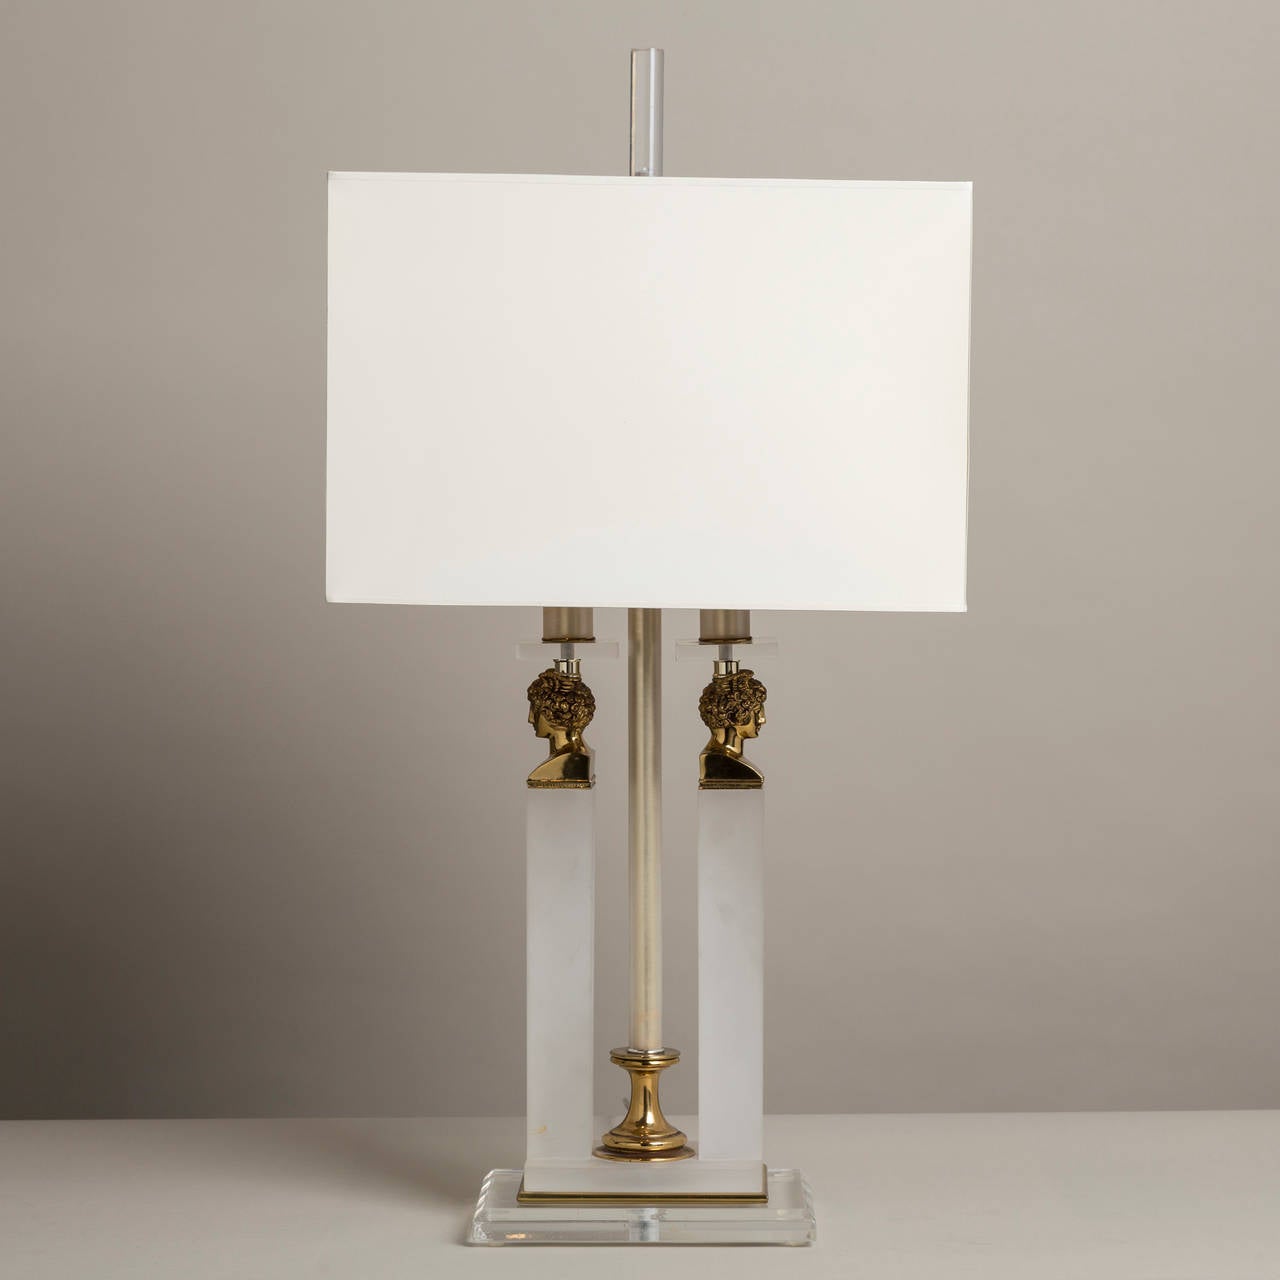 A single frosted and clear Lucite neoclassical style column table lamp with brass bust detailing, 1970s.
